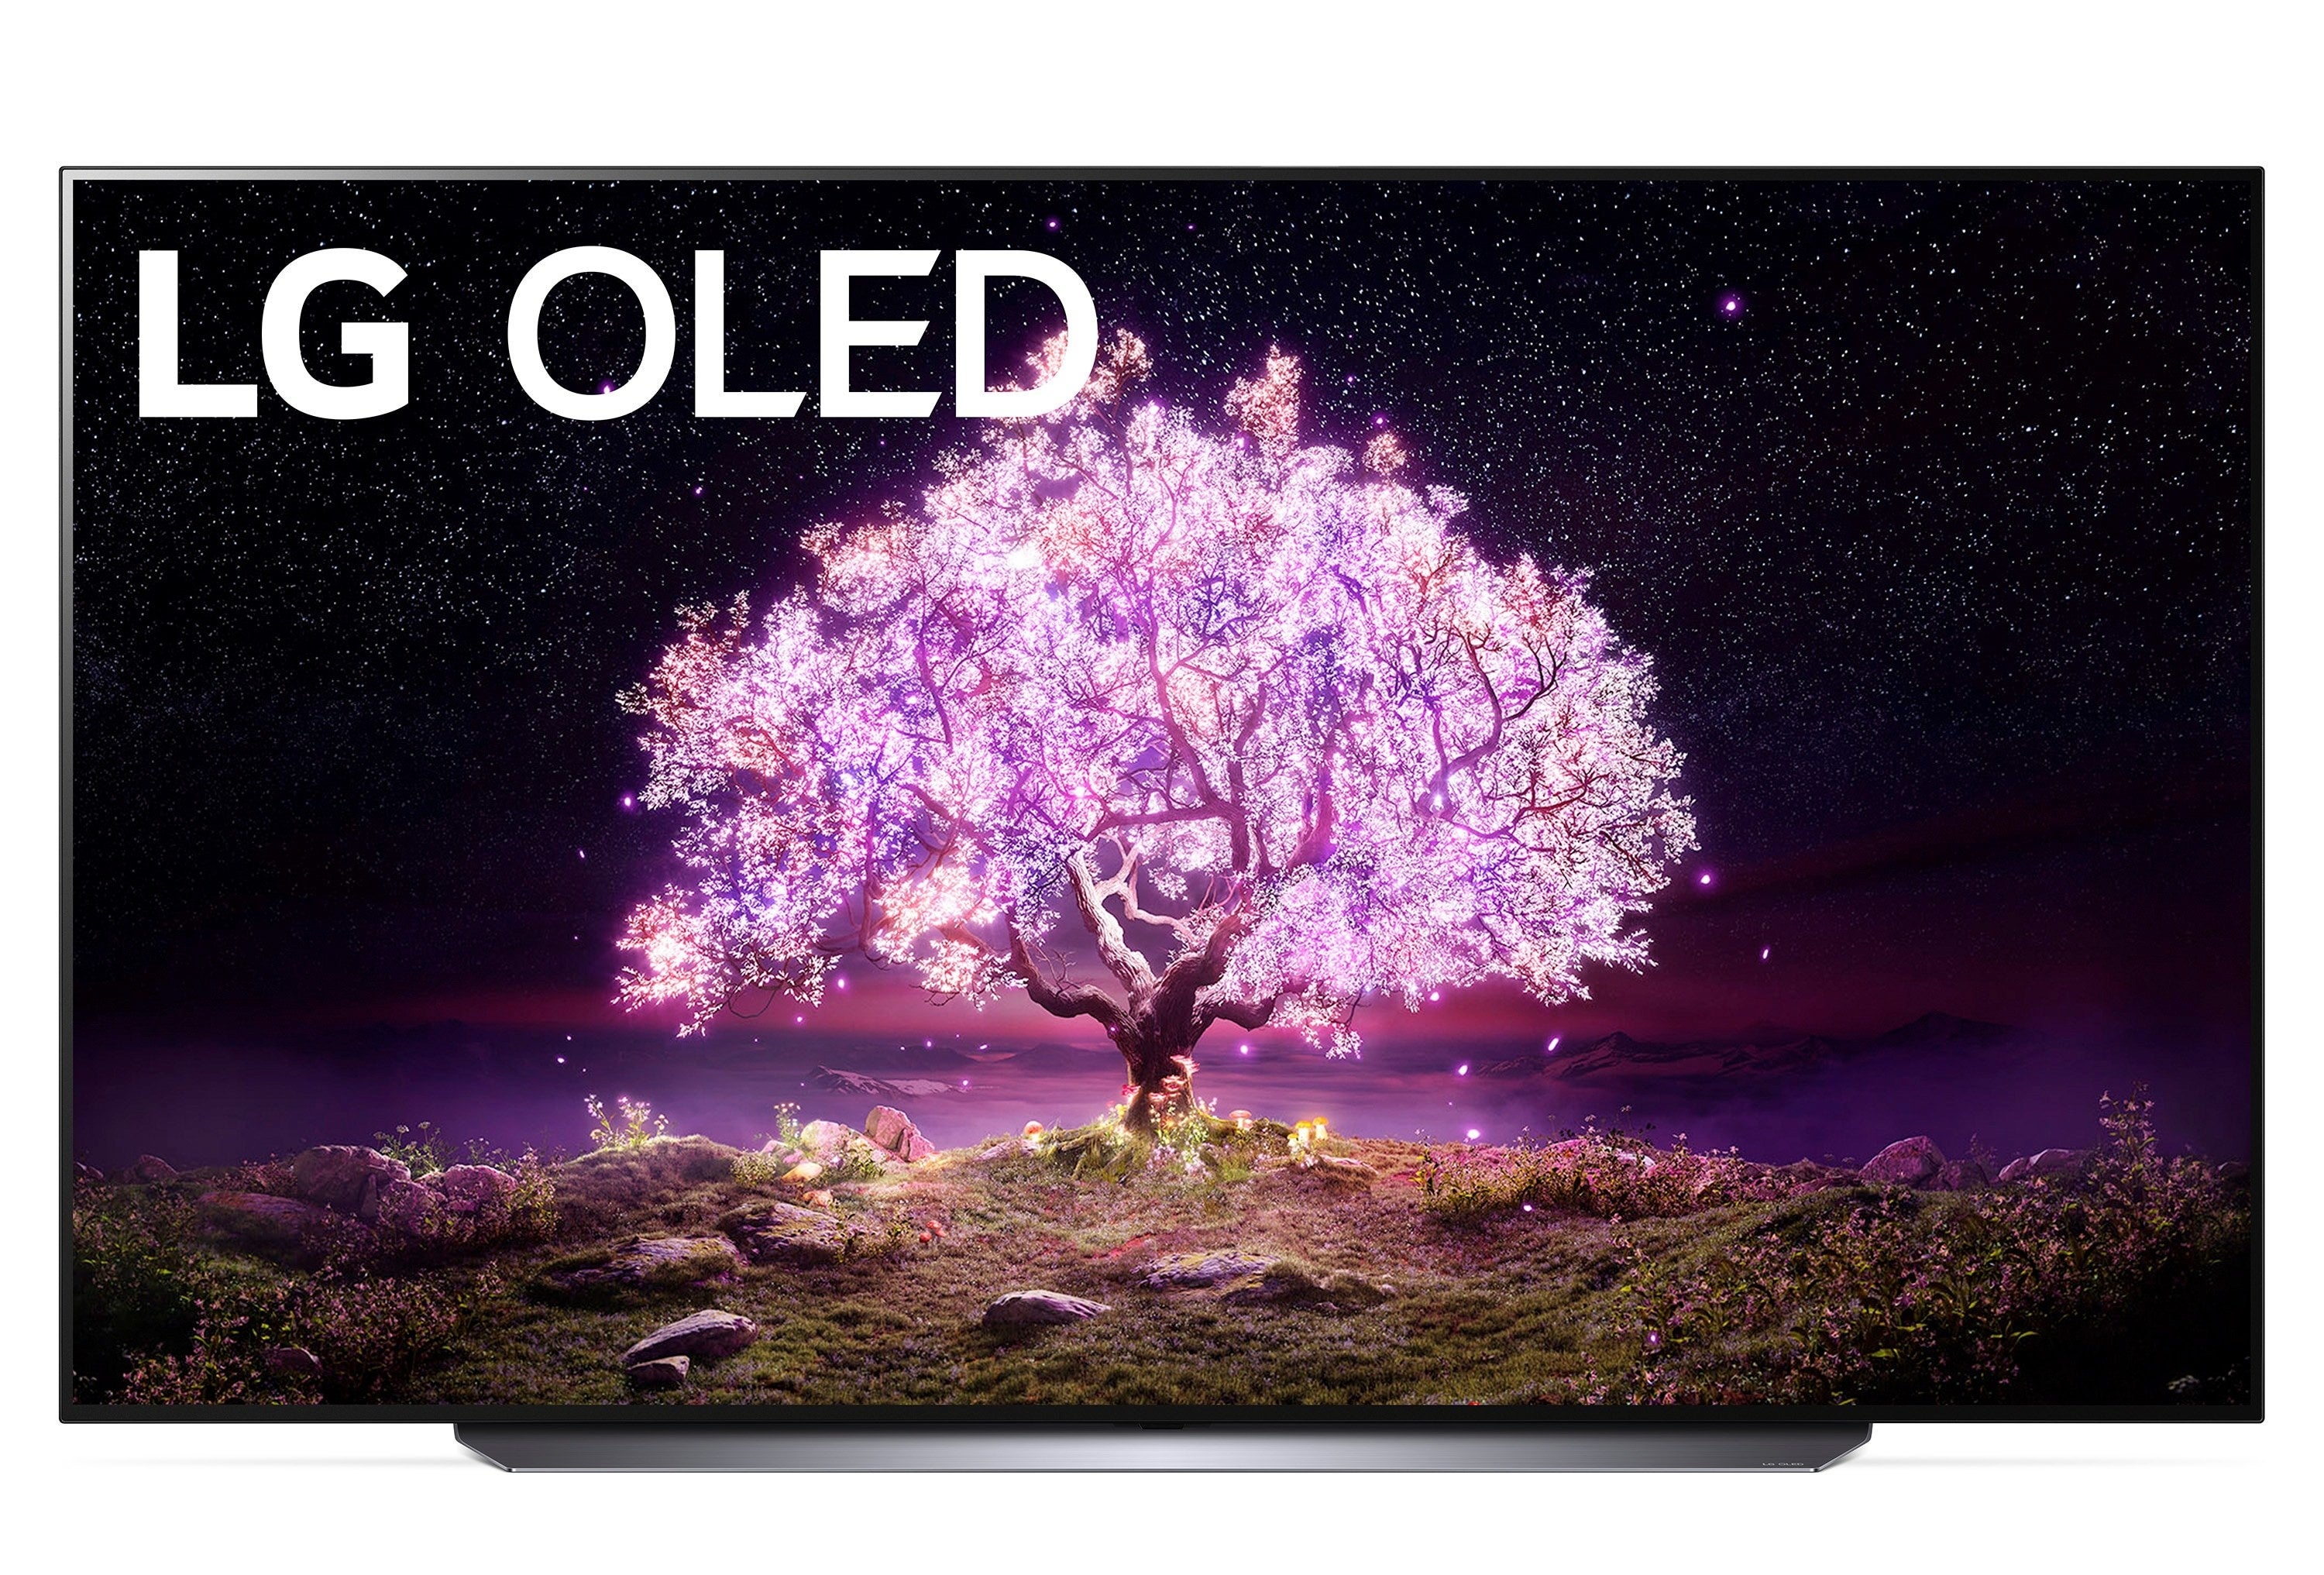 the TV with a colorful tree on the screen